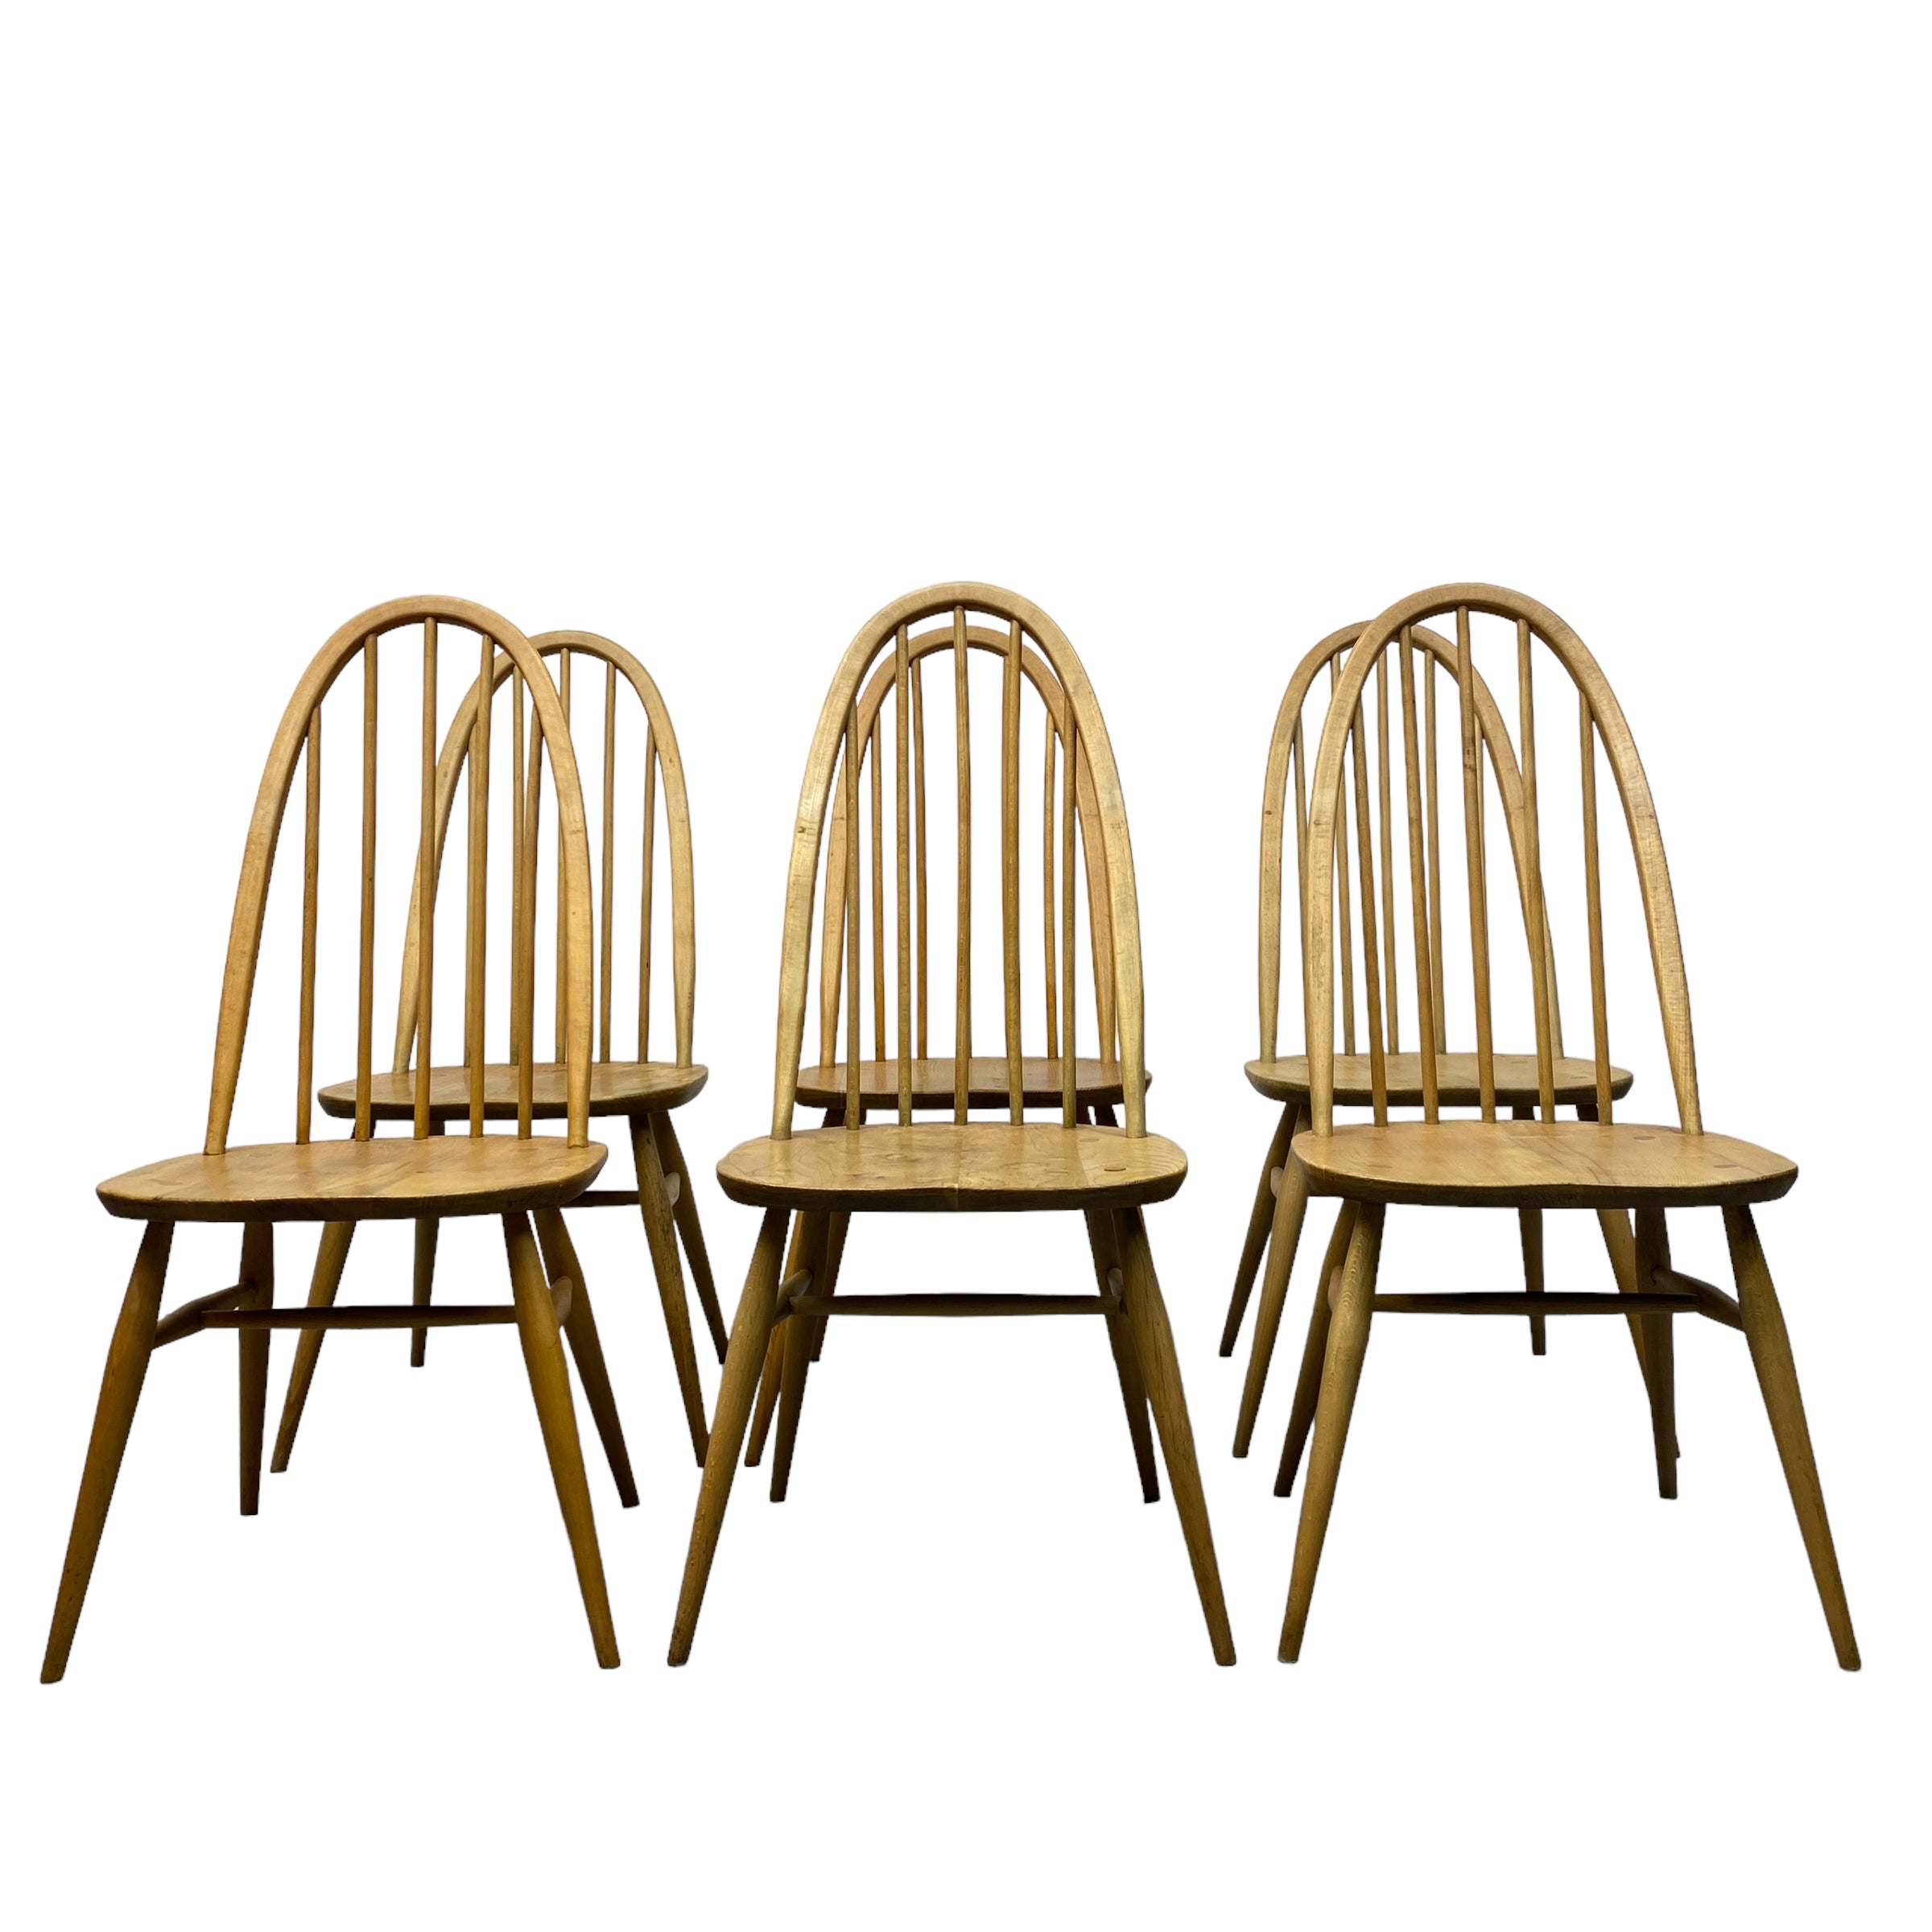 Spindled Ercol Dining Chairs